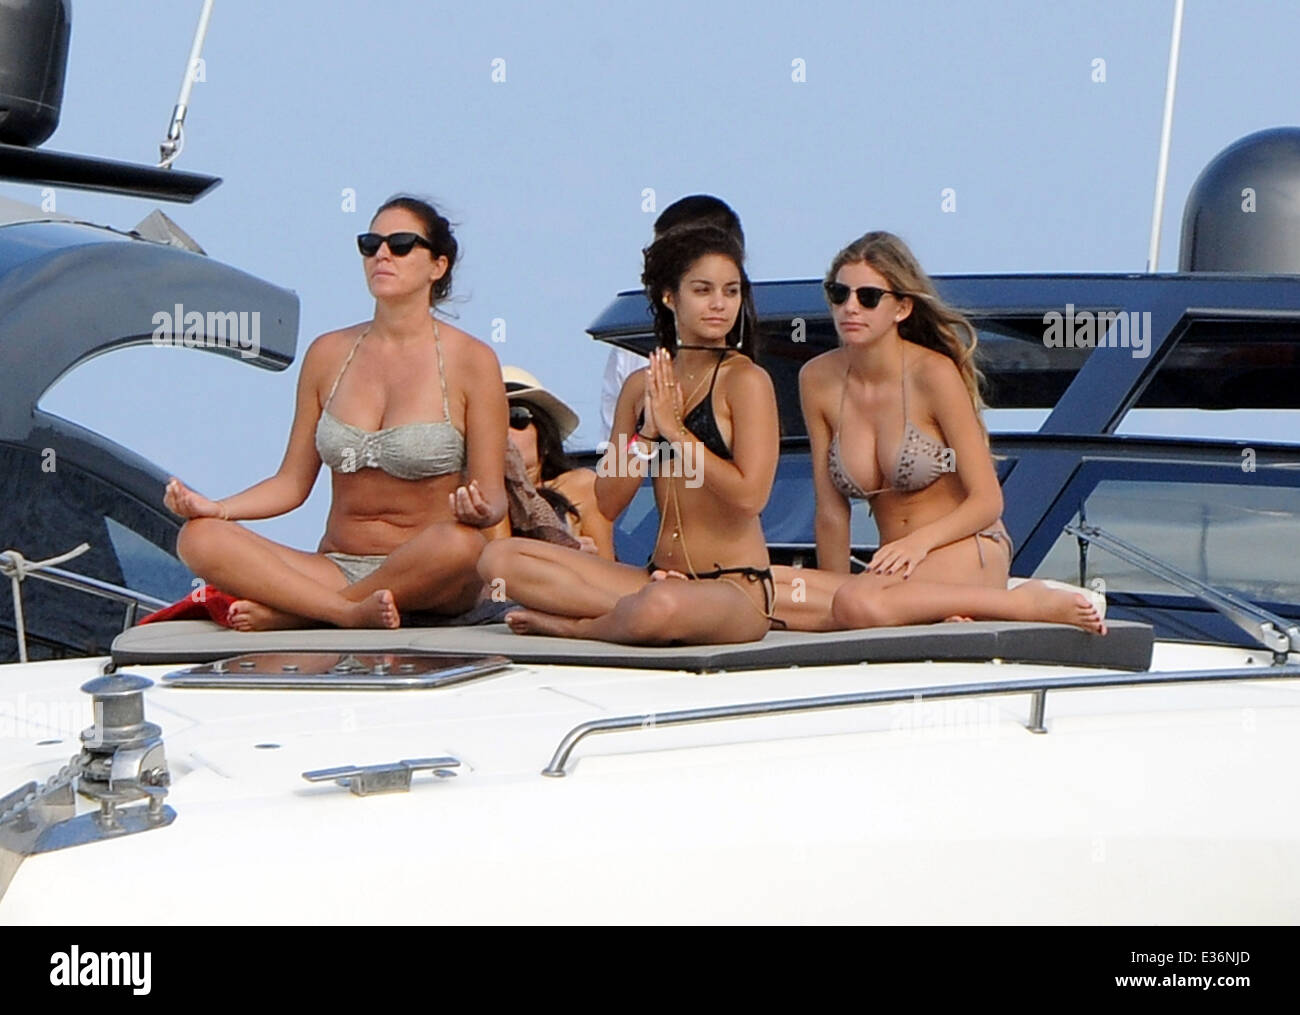 Vanessa Hudgens spends time on a boat with friends, including film directors Eli Roth and Terry Gilliam.  Featuring: Vanessa Hudgens Where: Ischia, Italy When: 19 Jul 2013  **Not available for publication in Italy** Stock Photo